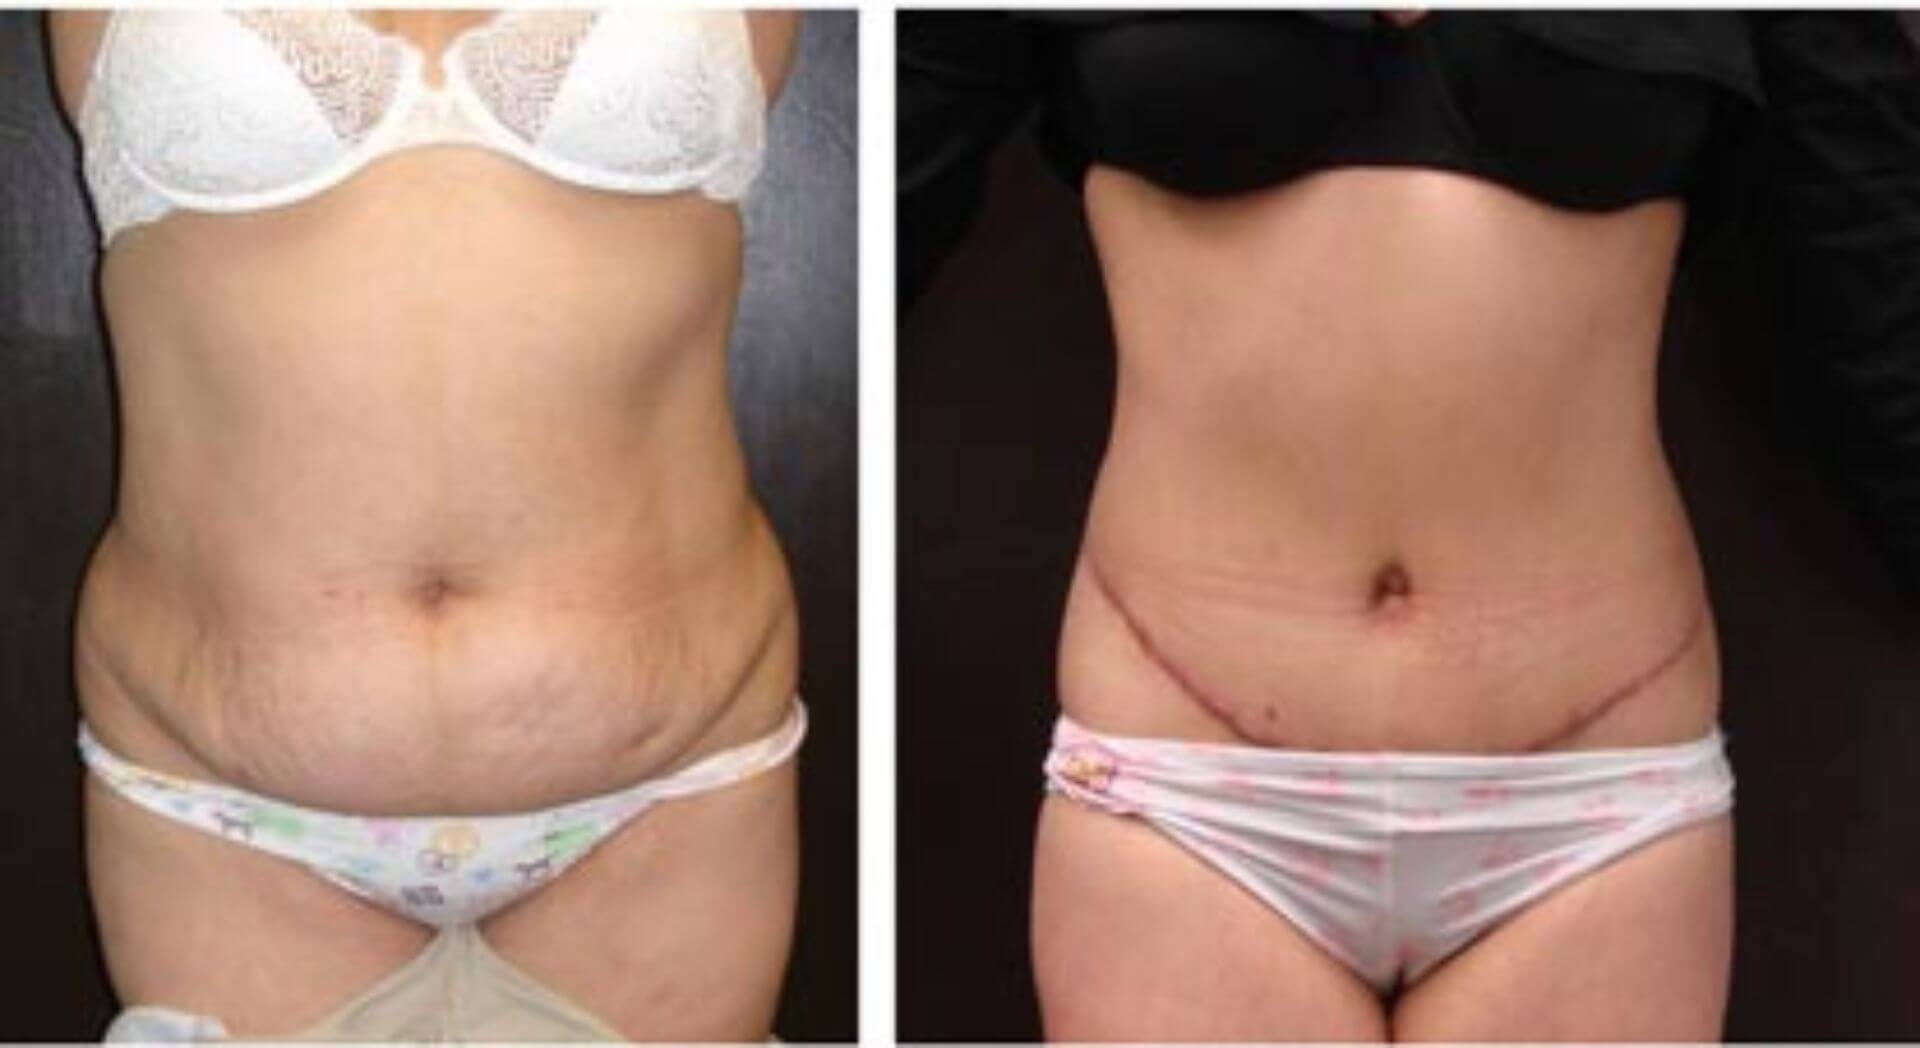 dr-penelope-treece-metairie-plastic-surgeon-before-after-abdominoplasty-7